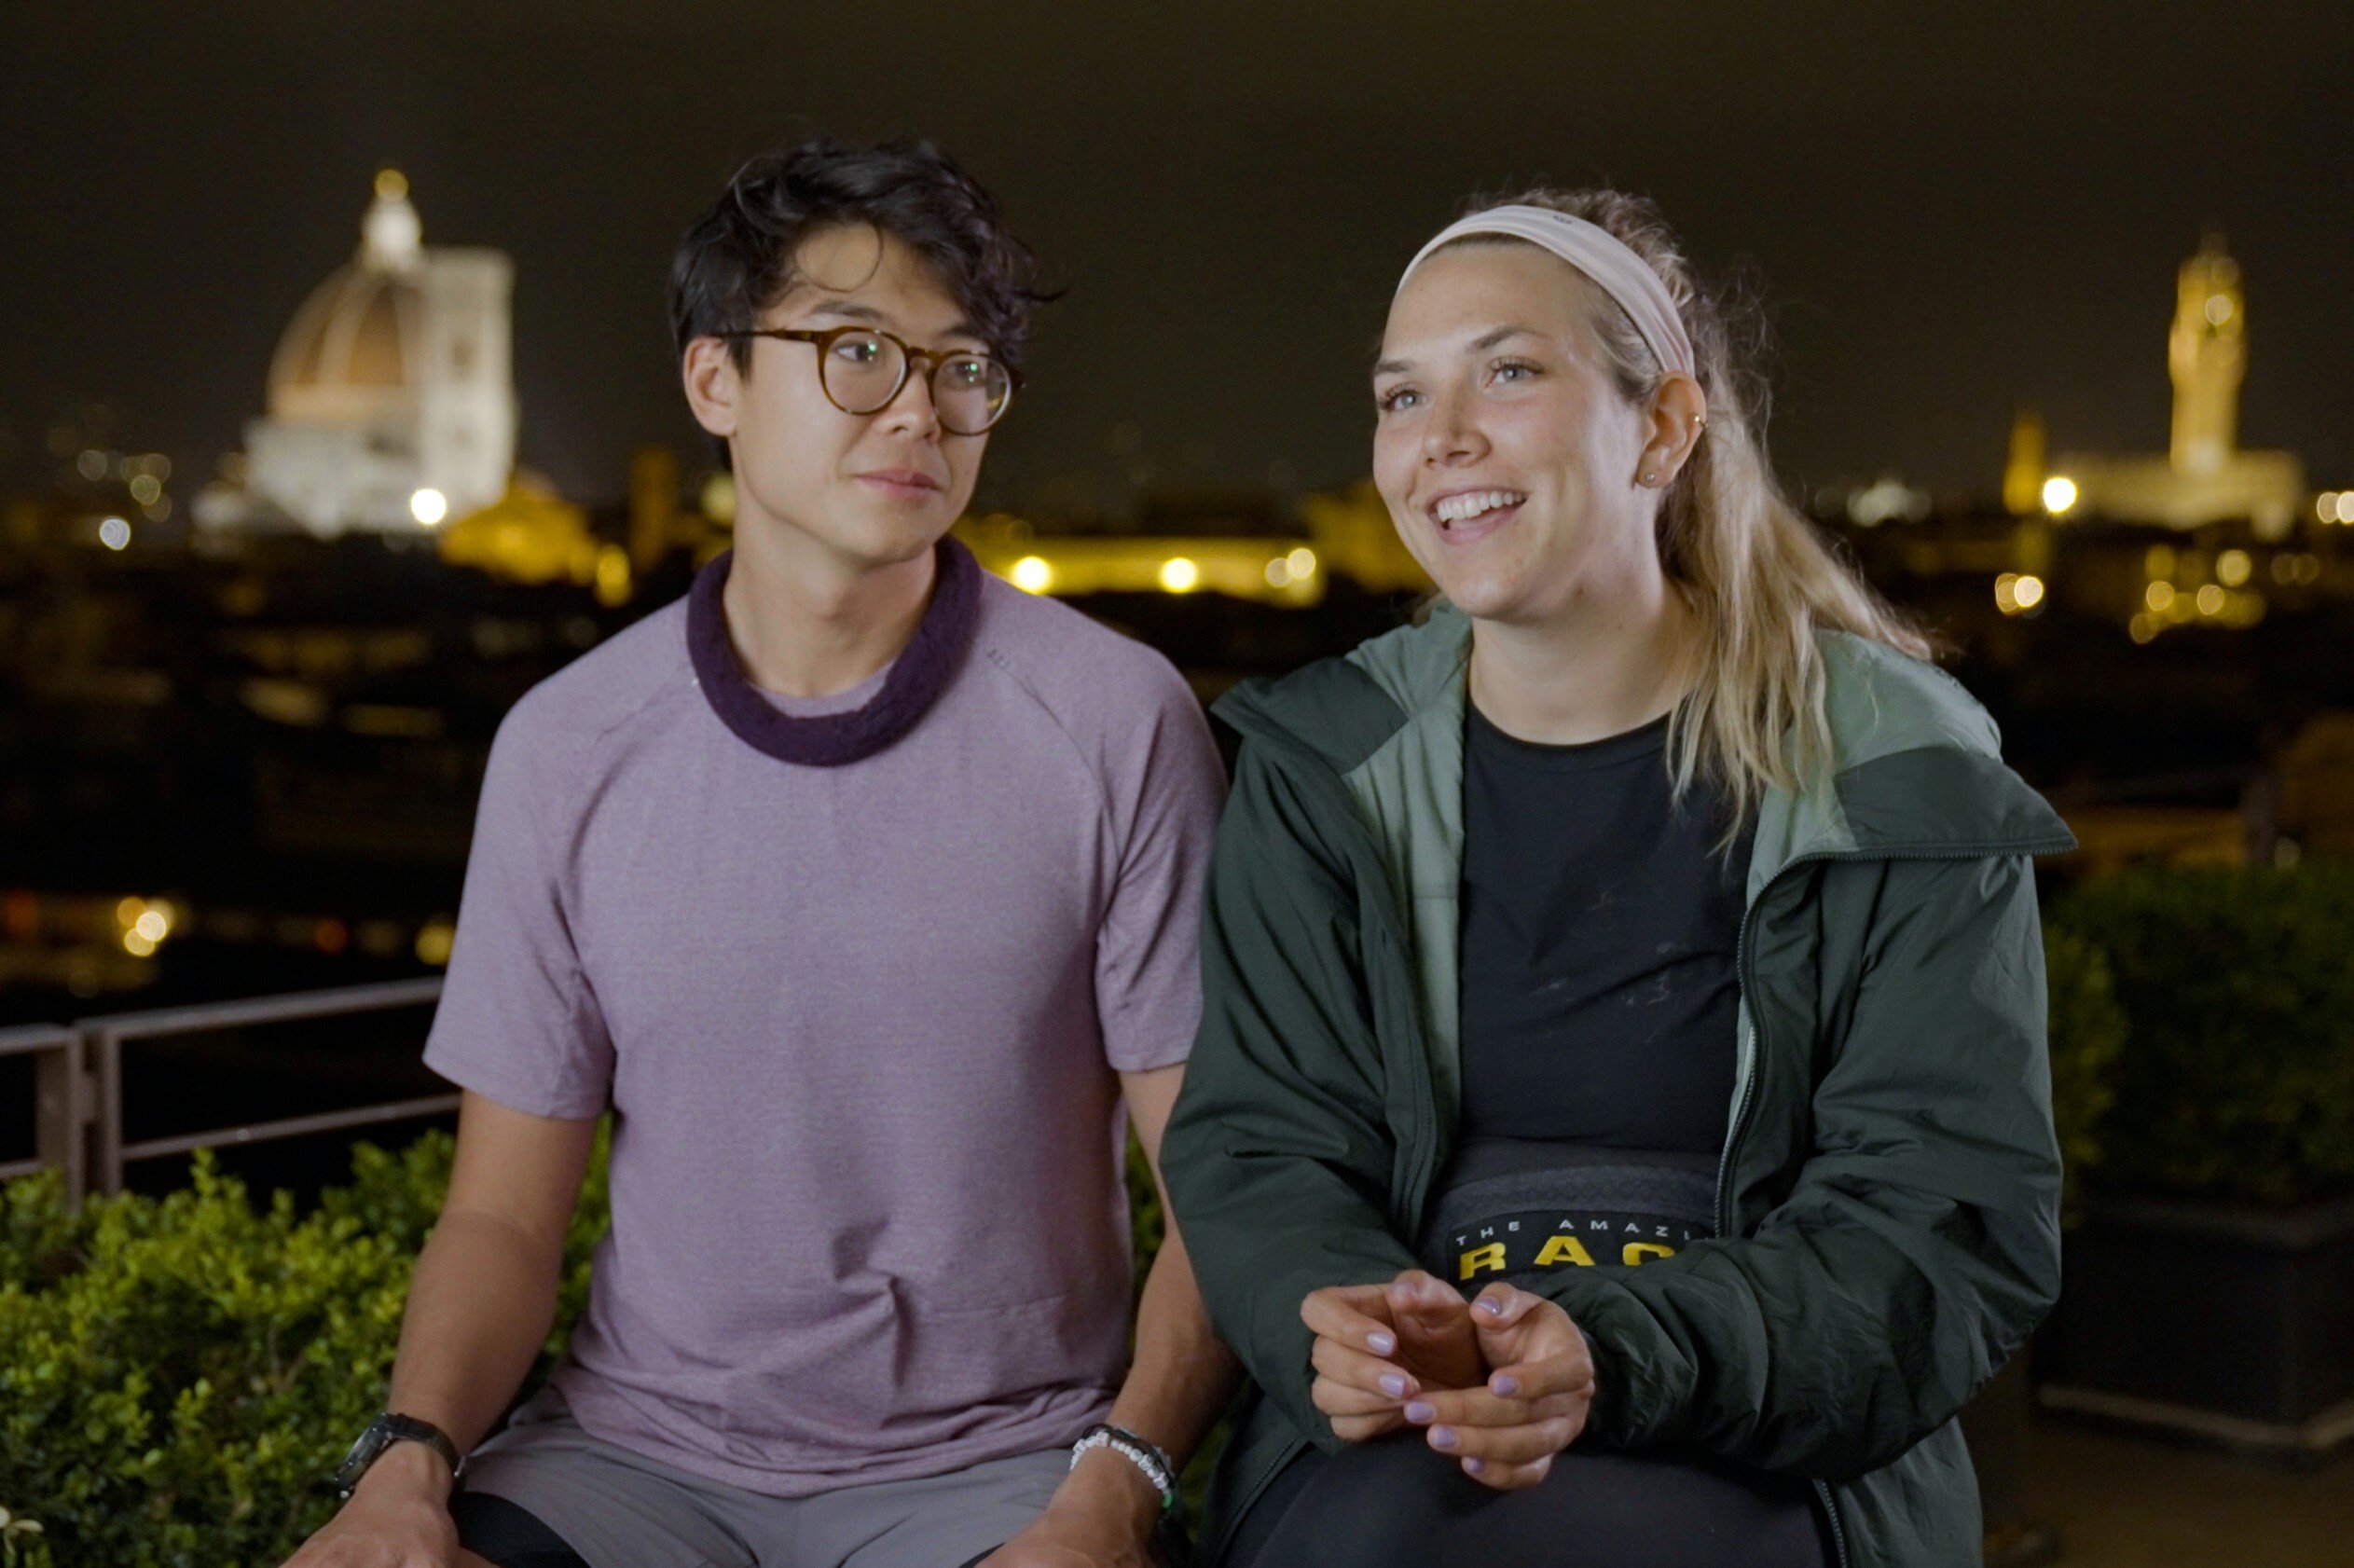 Derek Xiao and Claire Rehfuss, who might be the winner of 'The Amazing Race' Season 34,